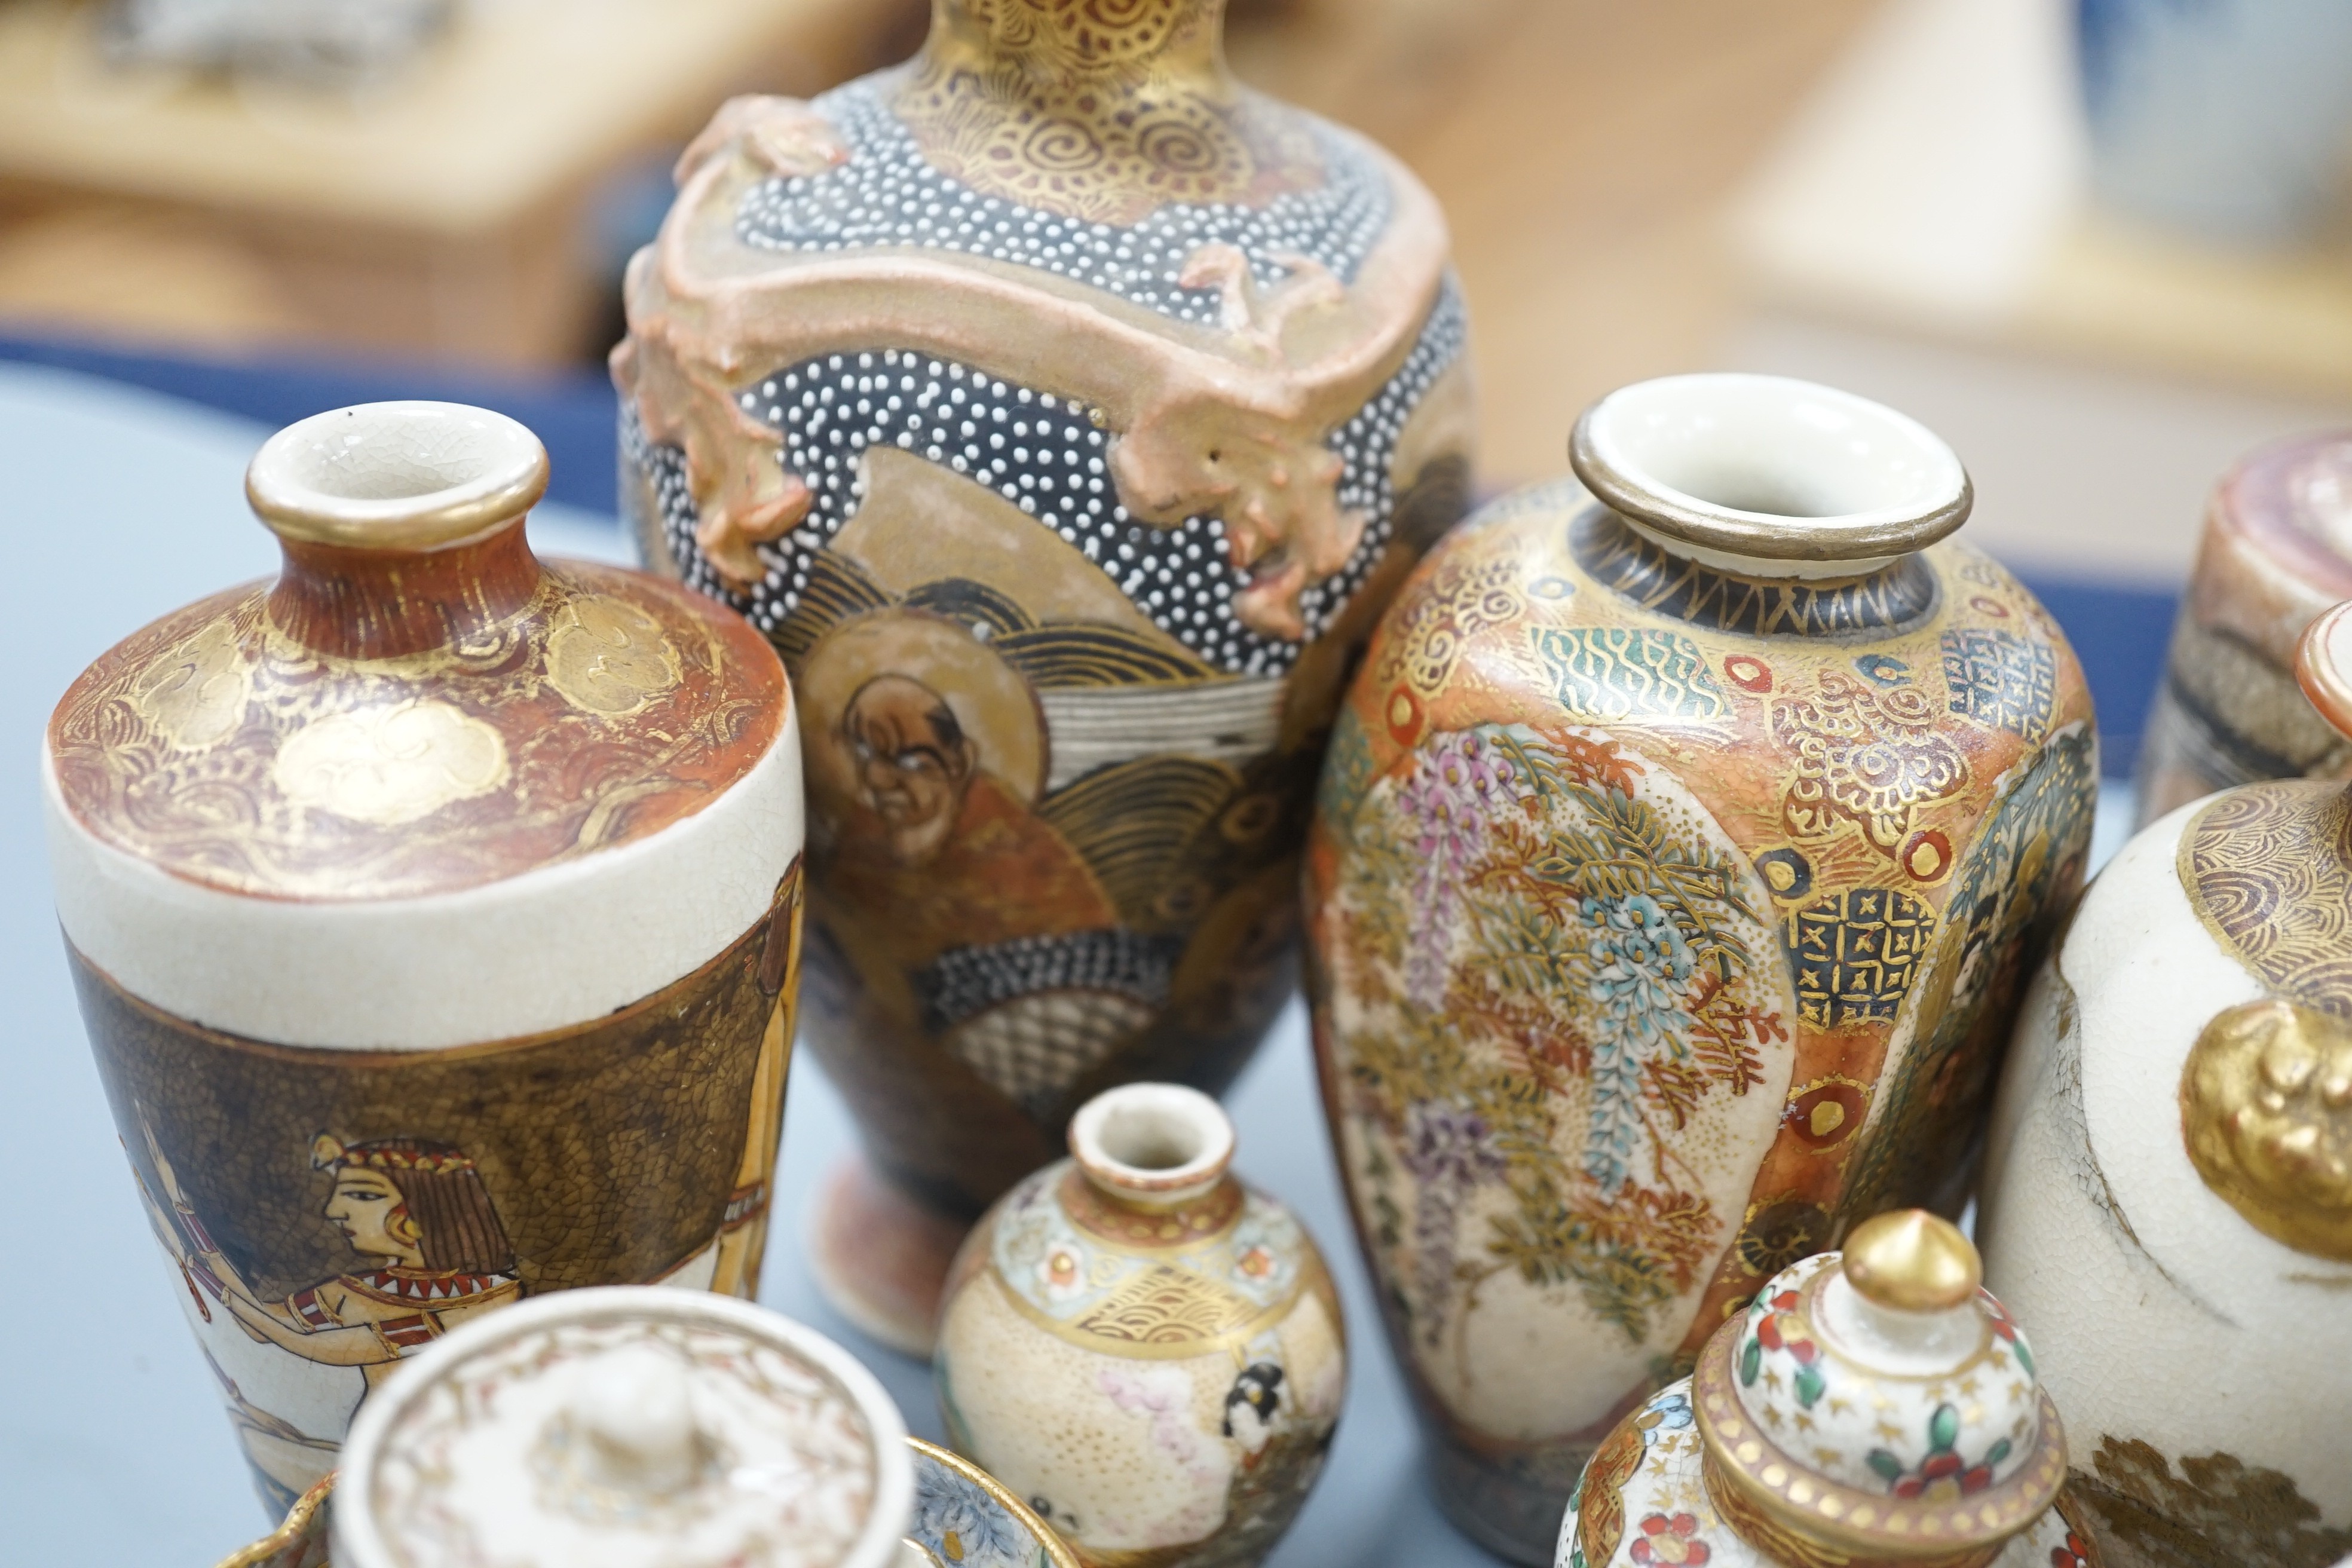 A group of small and miniature Satsuma pottery vases, koros and covers and dishes, late 19th/early 20th century, 3cm - 12cm